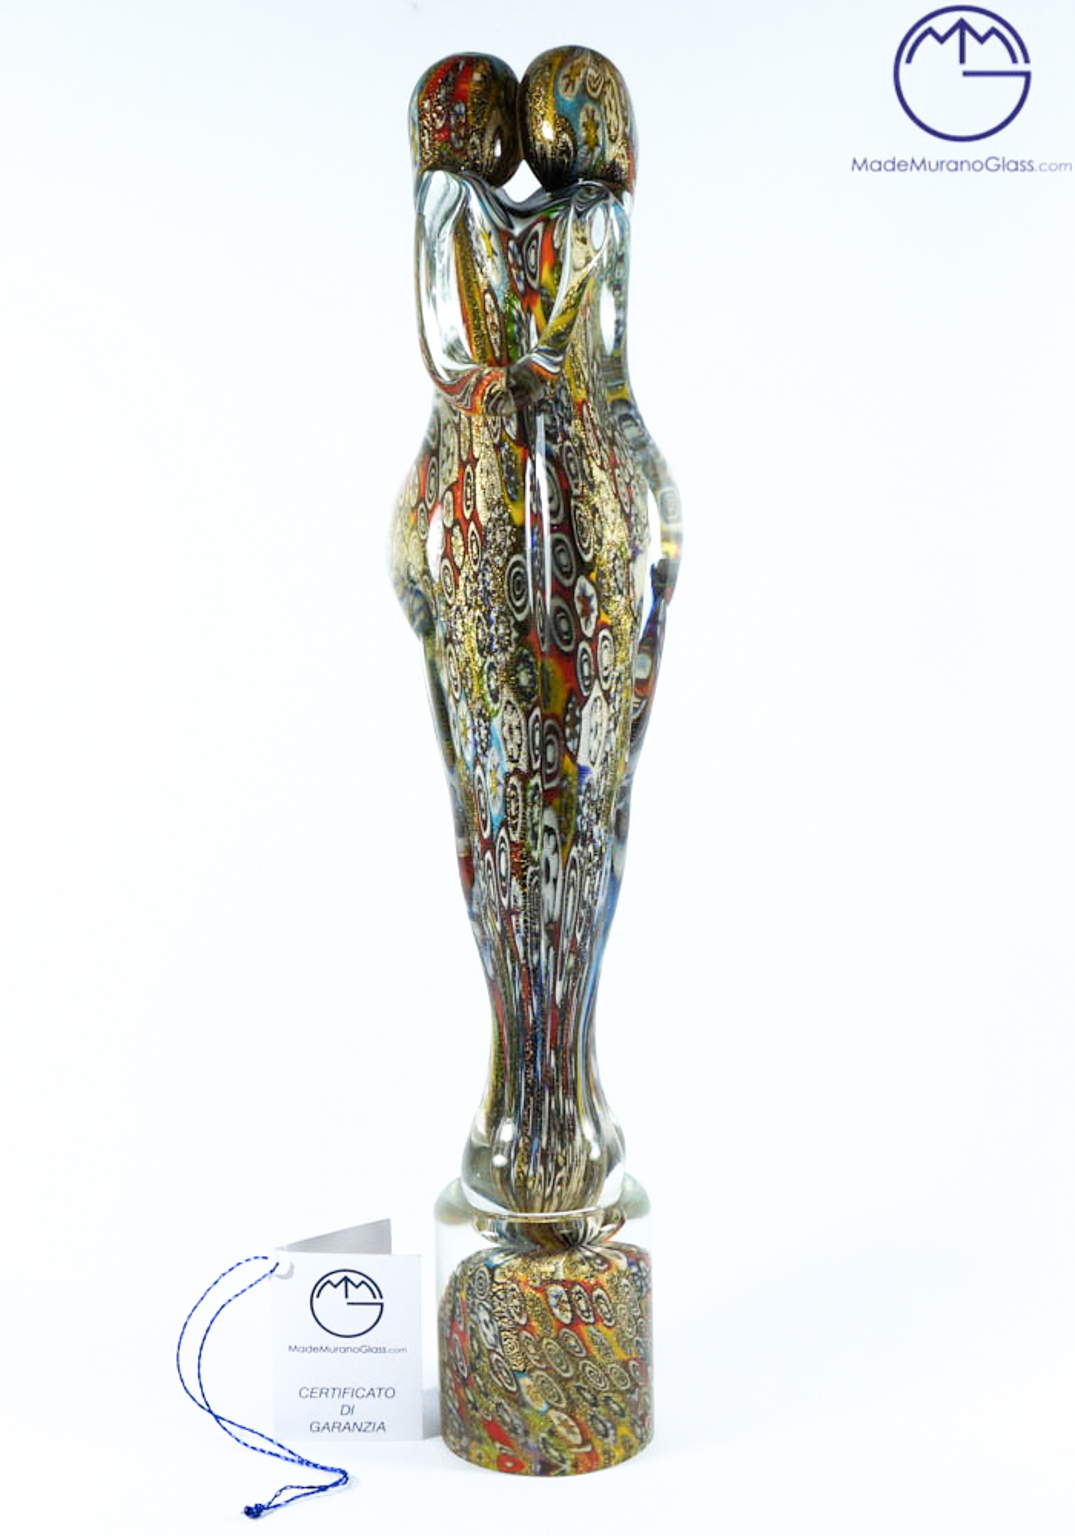 Murano Glass Figurines - Lovers With Murrina And Gold 24 Carats